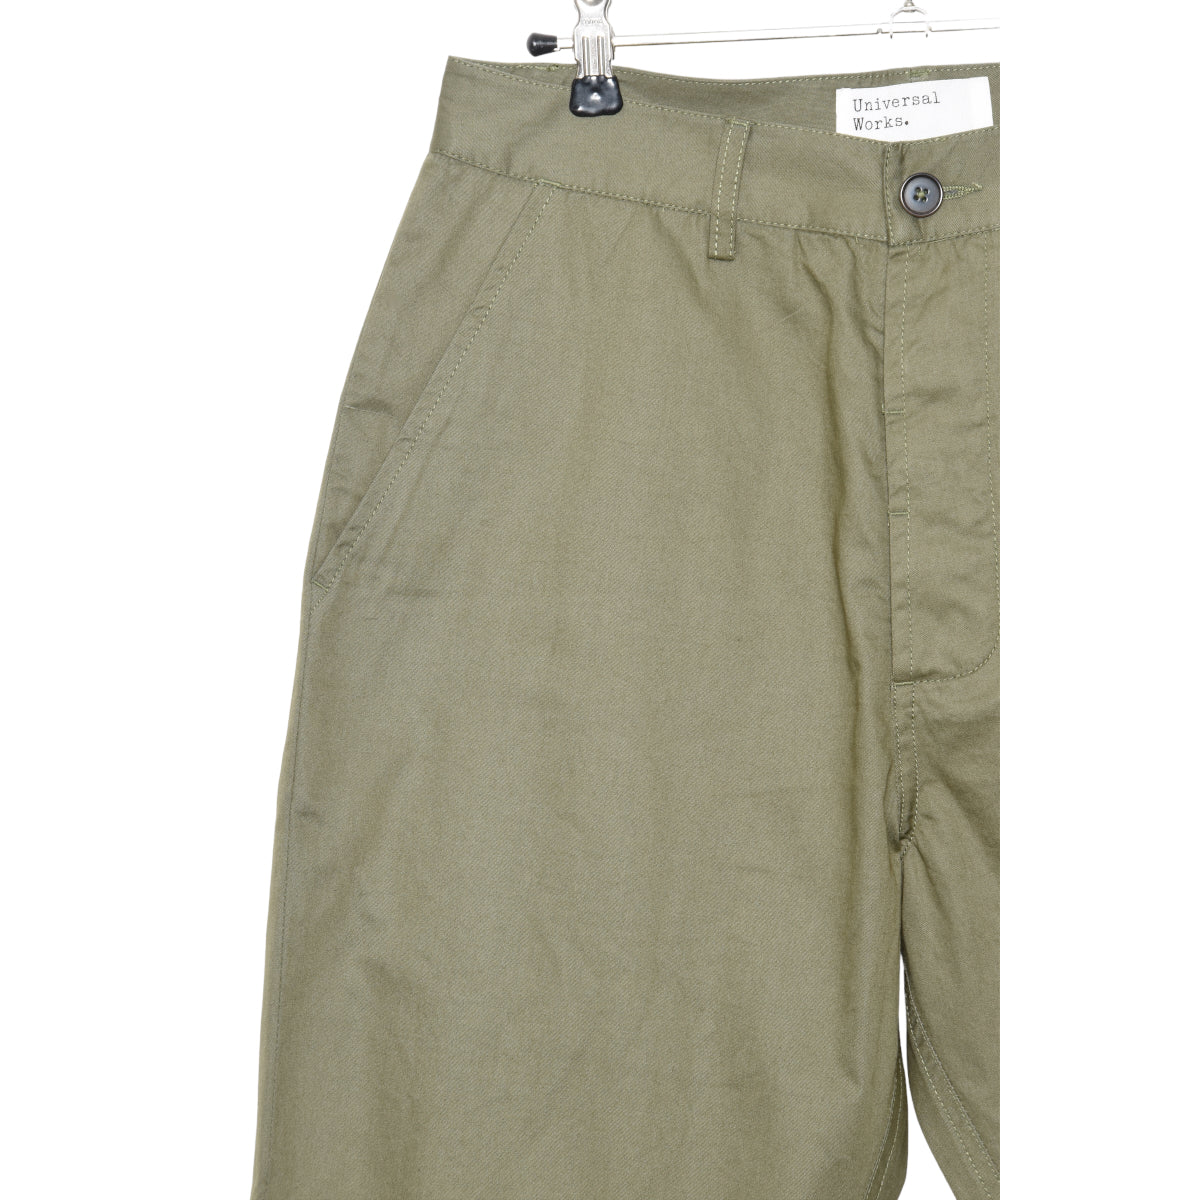 Universal Works RB Chino fine twill olive P28057